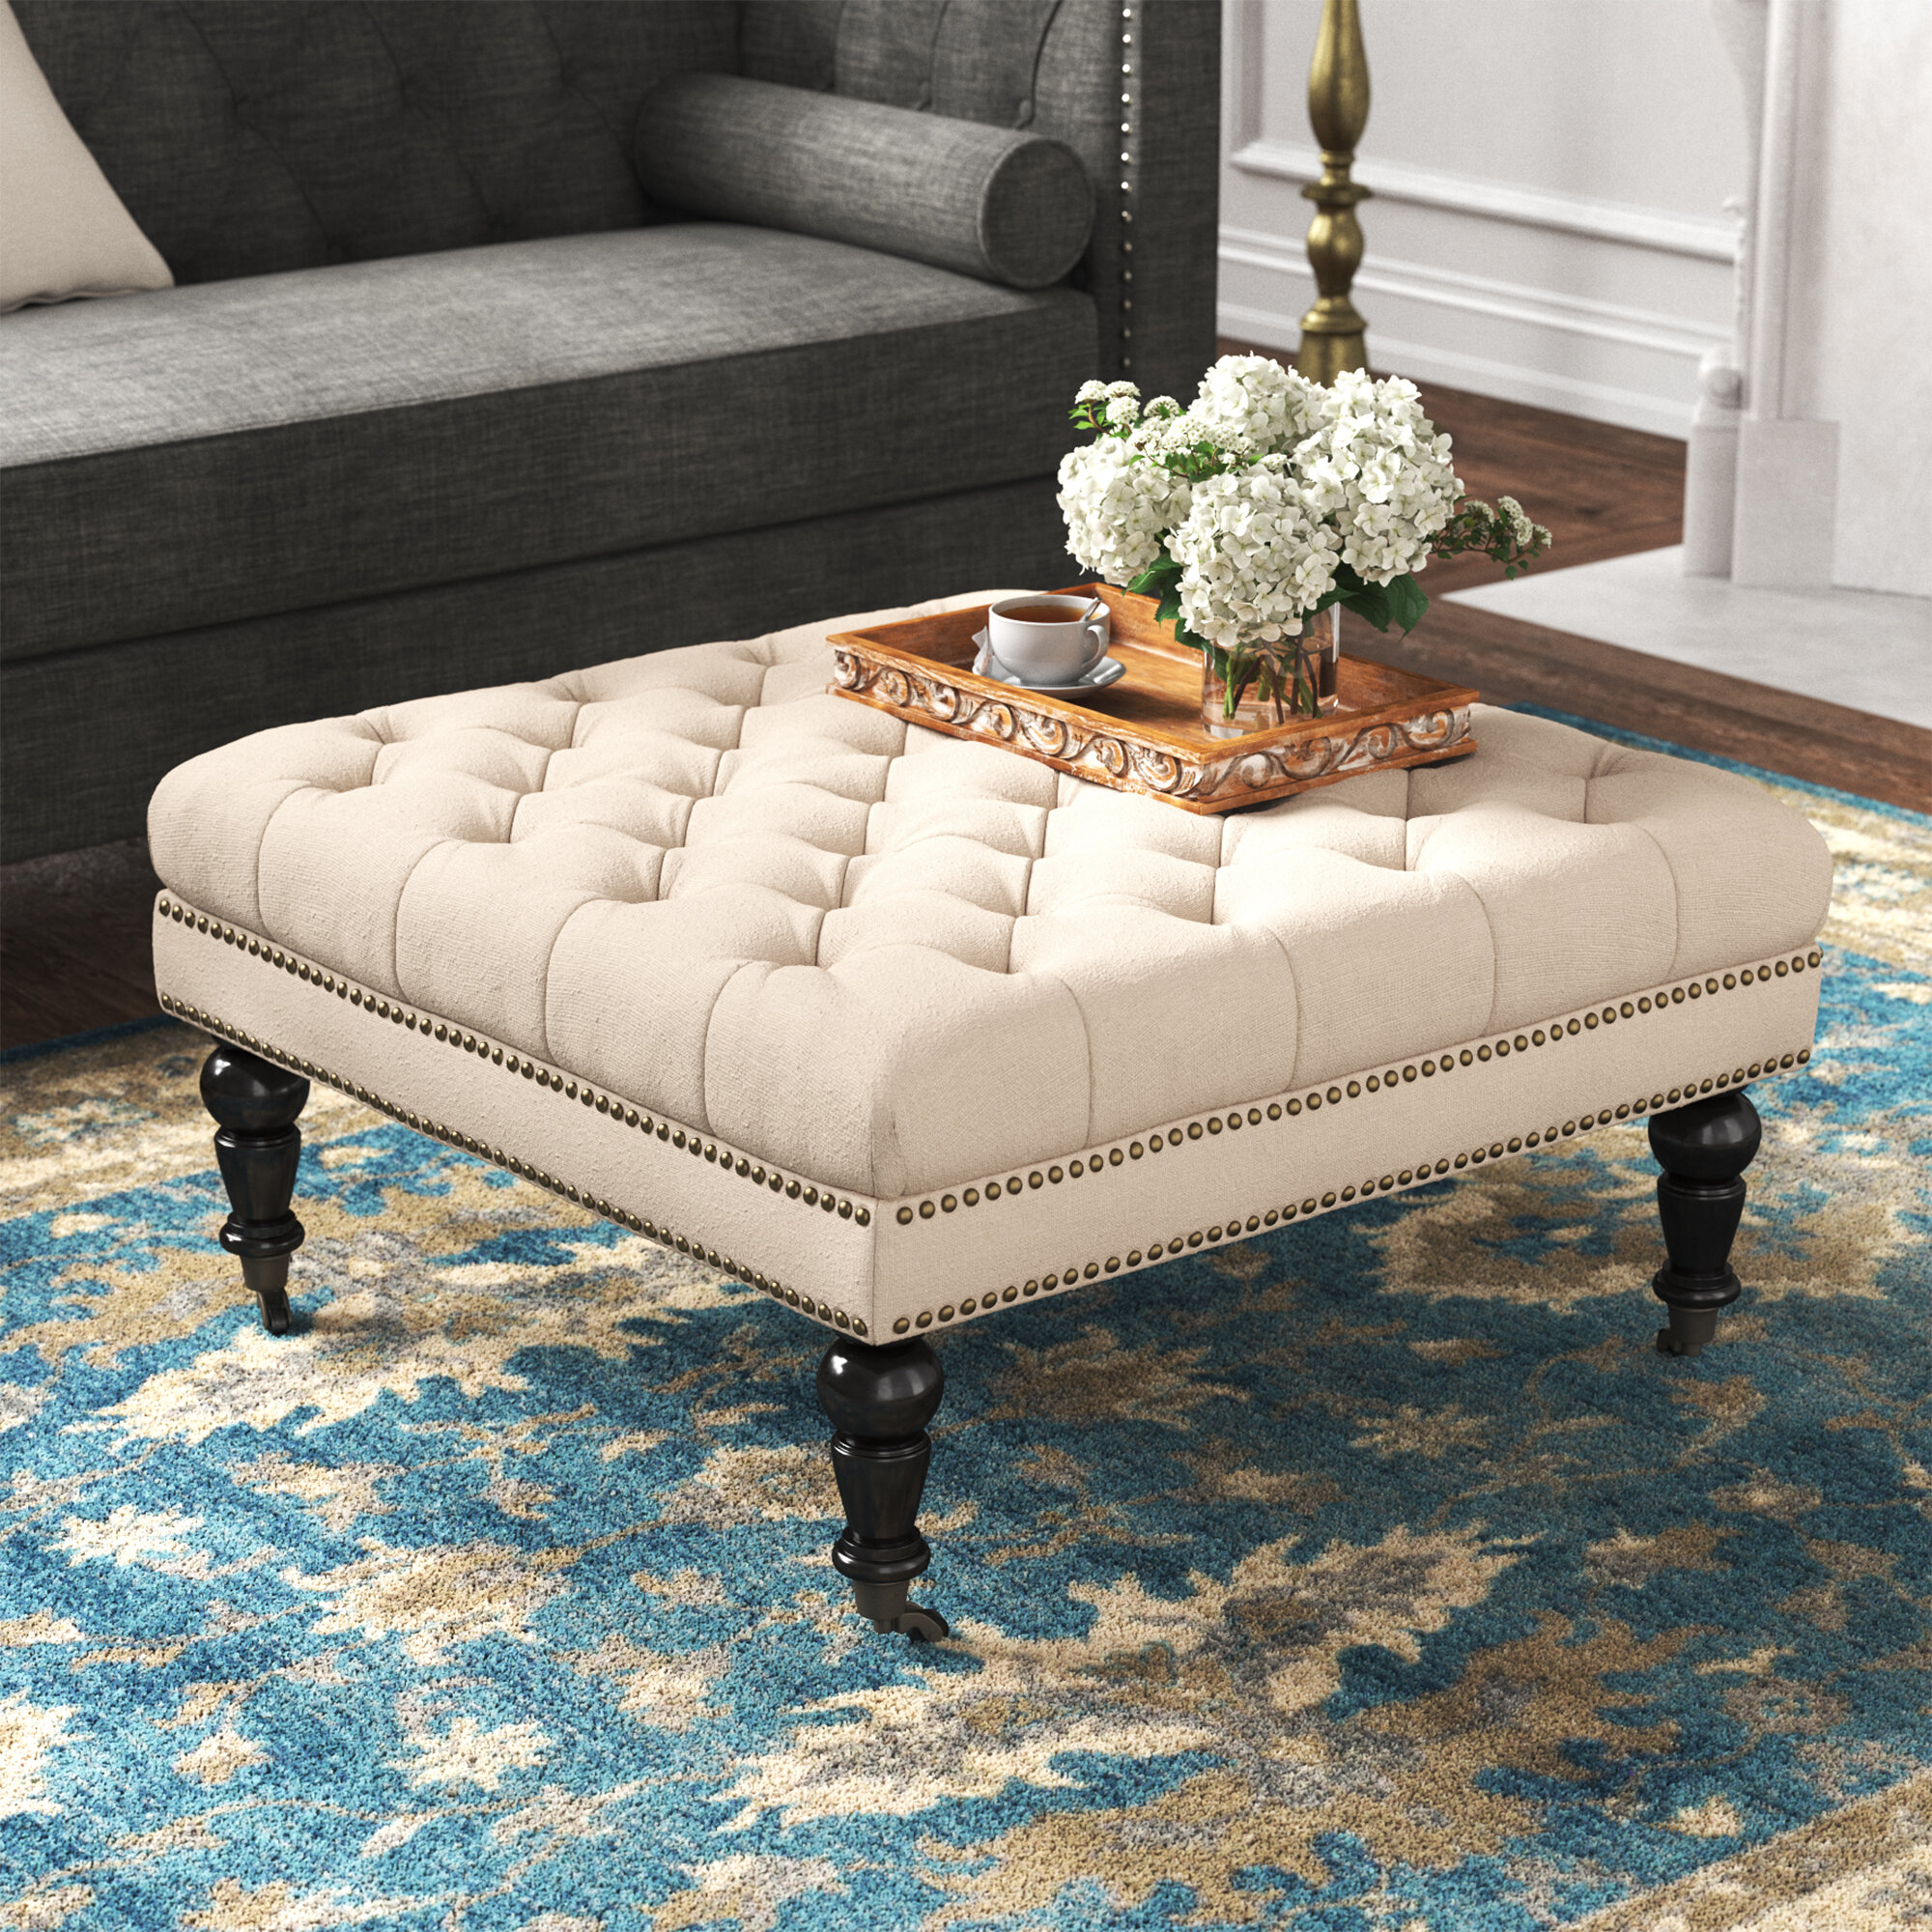 Kelly Clarkson Home Landis 346 Tufted Square Cocktail Ottoman Reviews Wayfair